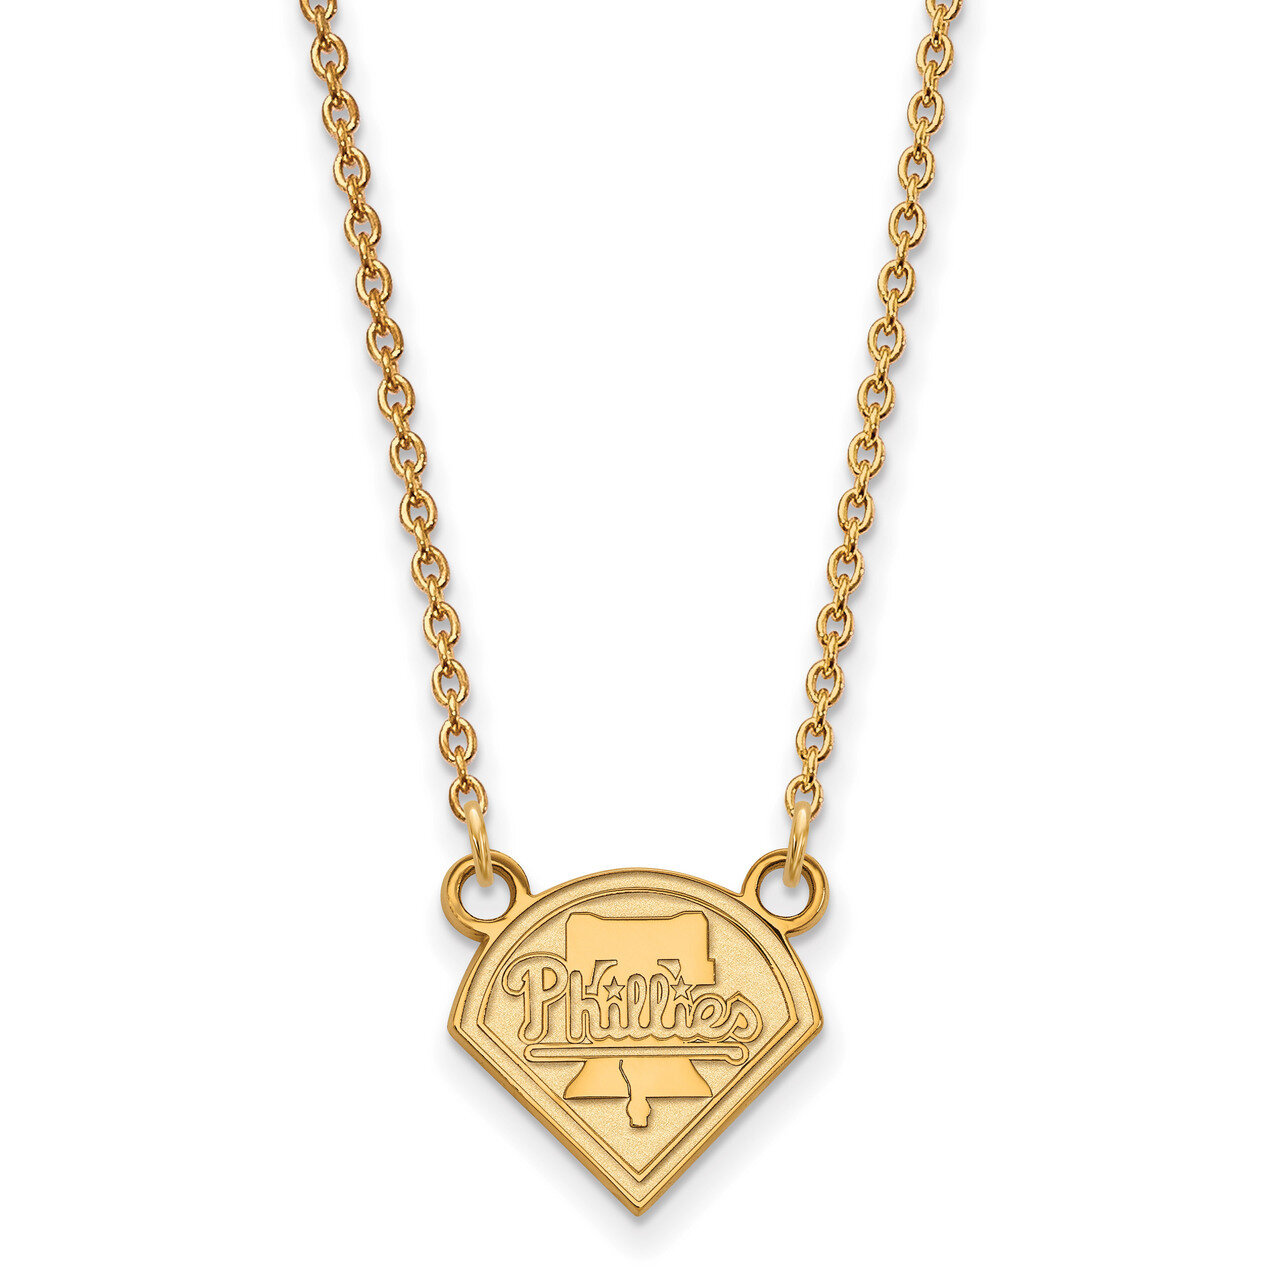 MLB Philadelphia Phillies Sm Pend with Necklace 14k Yellow Gold 4Y006PHI-18